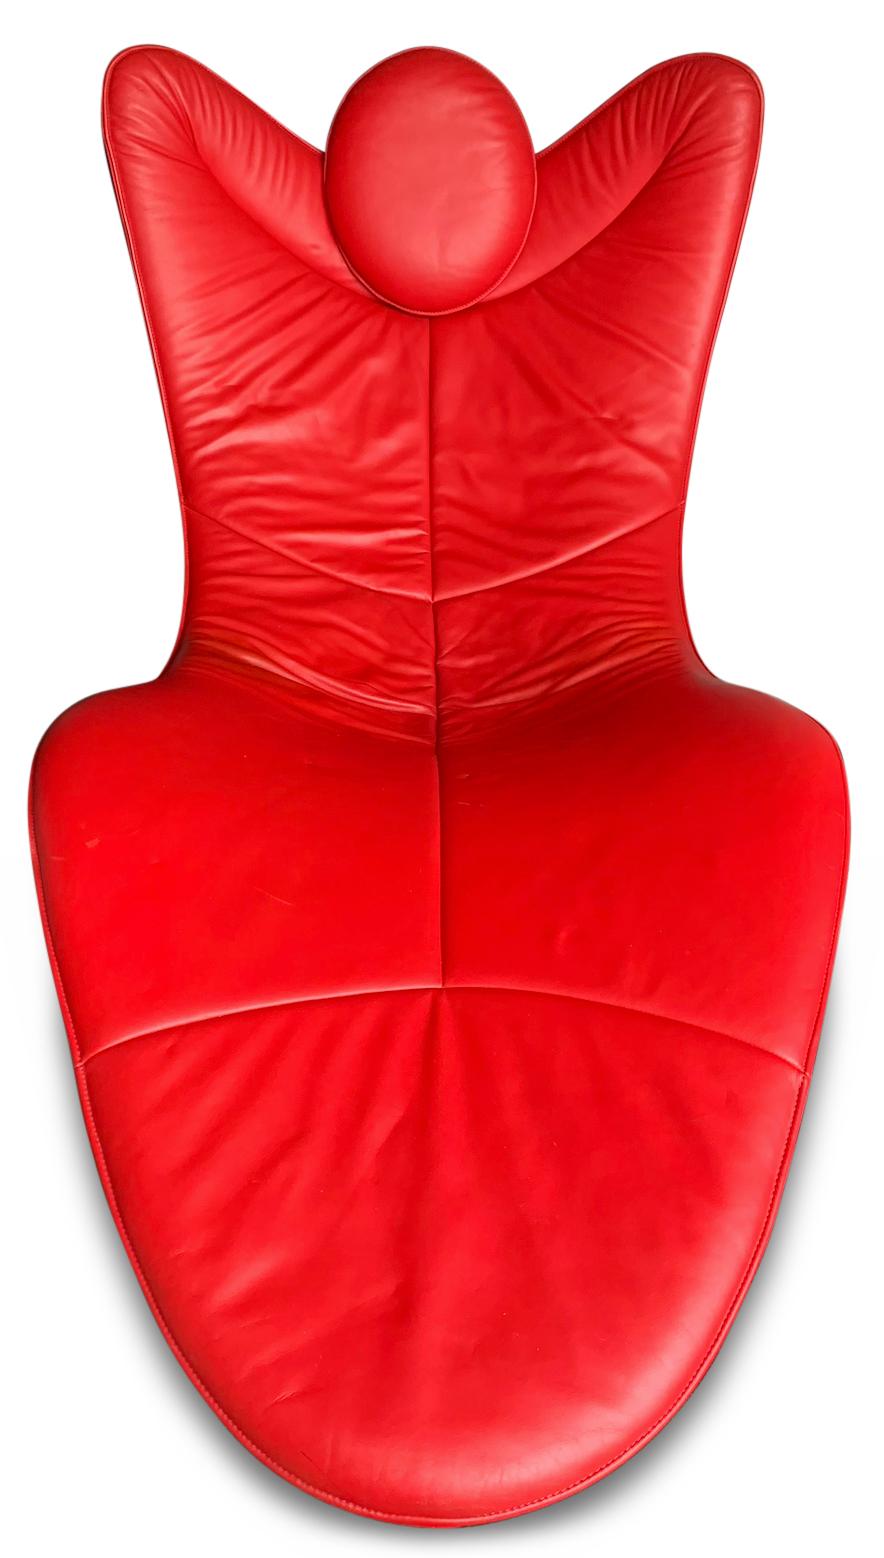 red chaise lounge chair